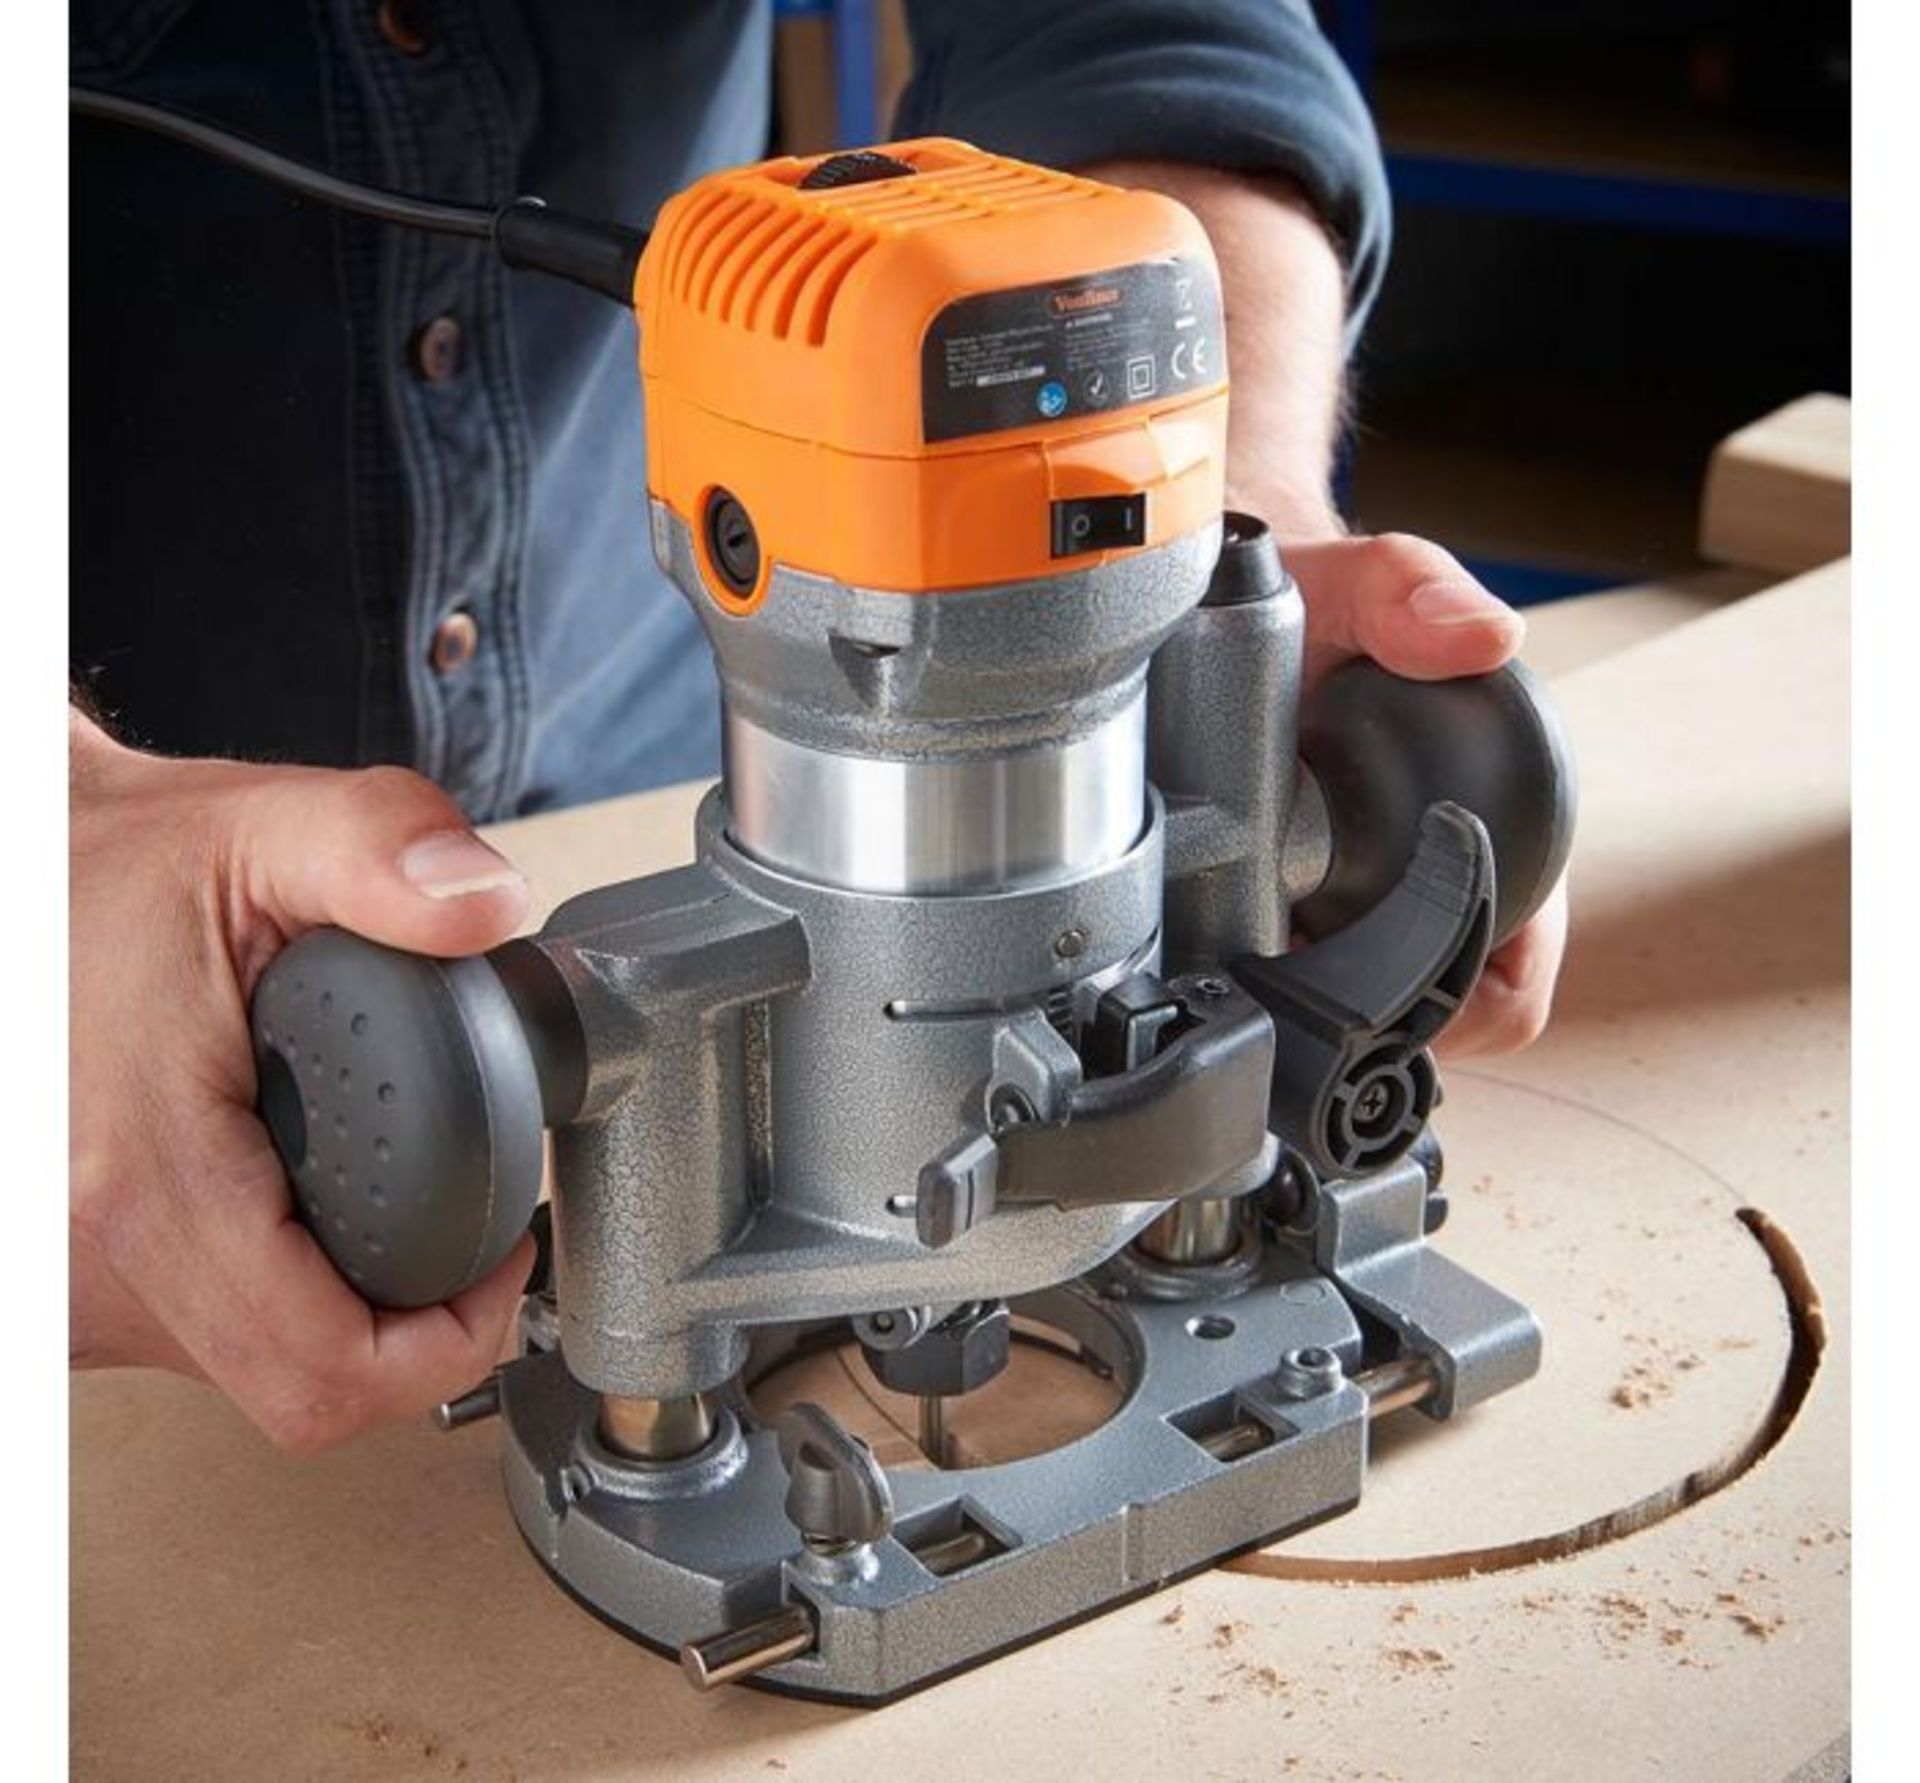 (VL7) Compact Deluxe Palm Router Saw Compatible with bits with a 1/4" or a 3/8" shank 710W -...